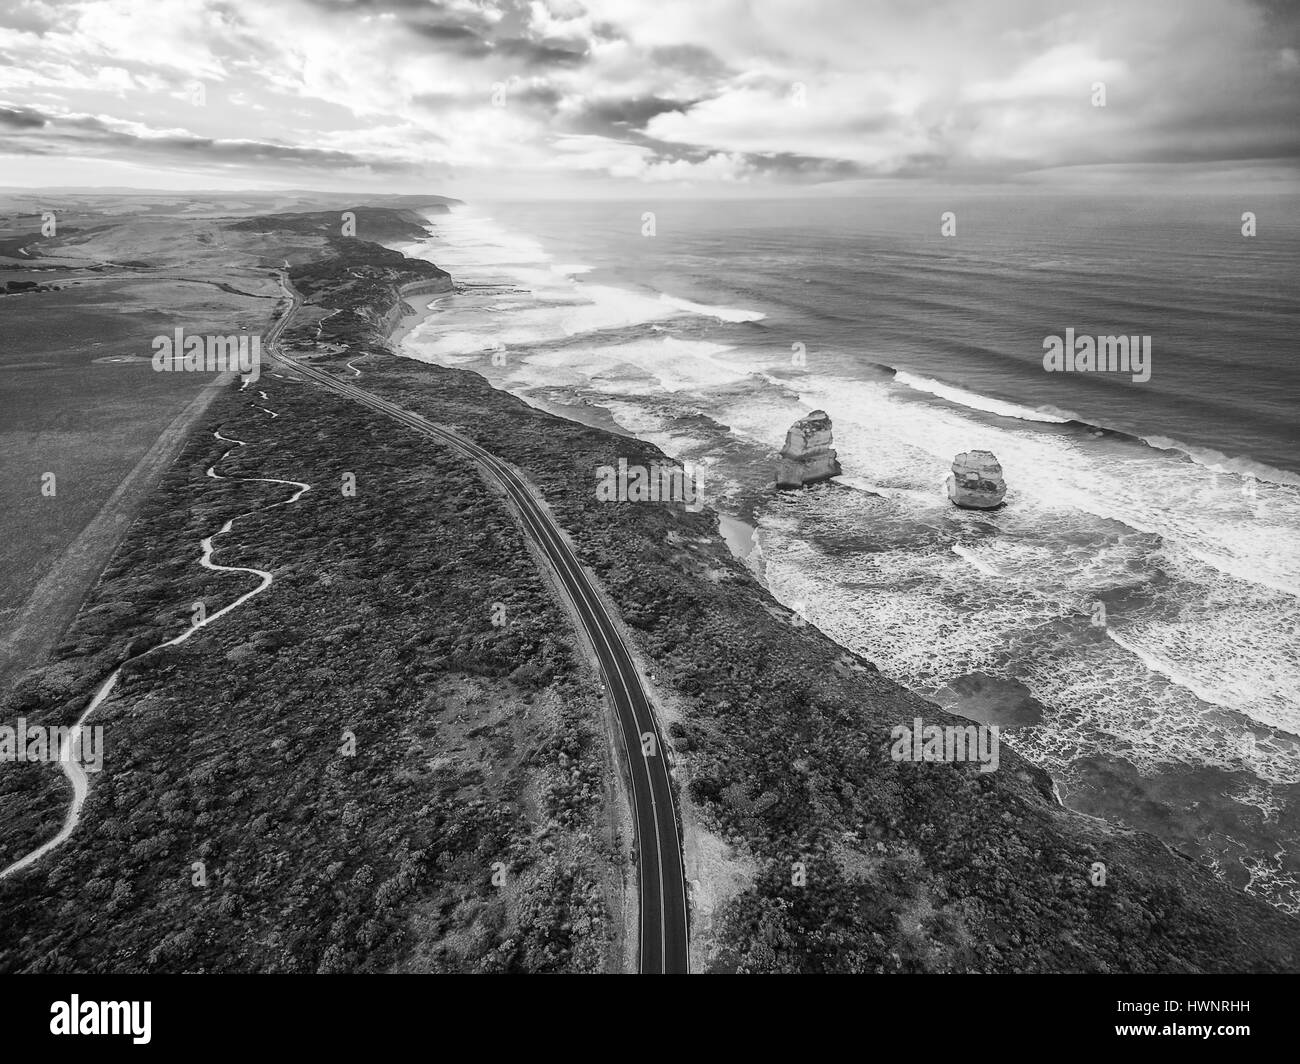 Black and white aerial view of the Great Ocean Road with Gog and Magog rock formations, Victoria, Australia Stock Photo